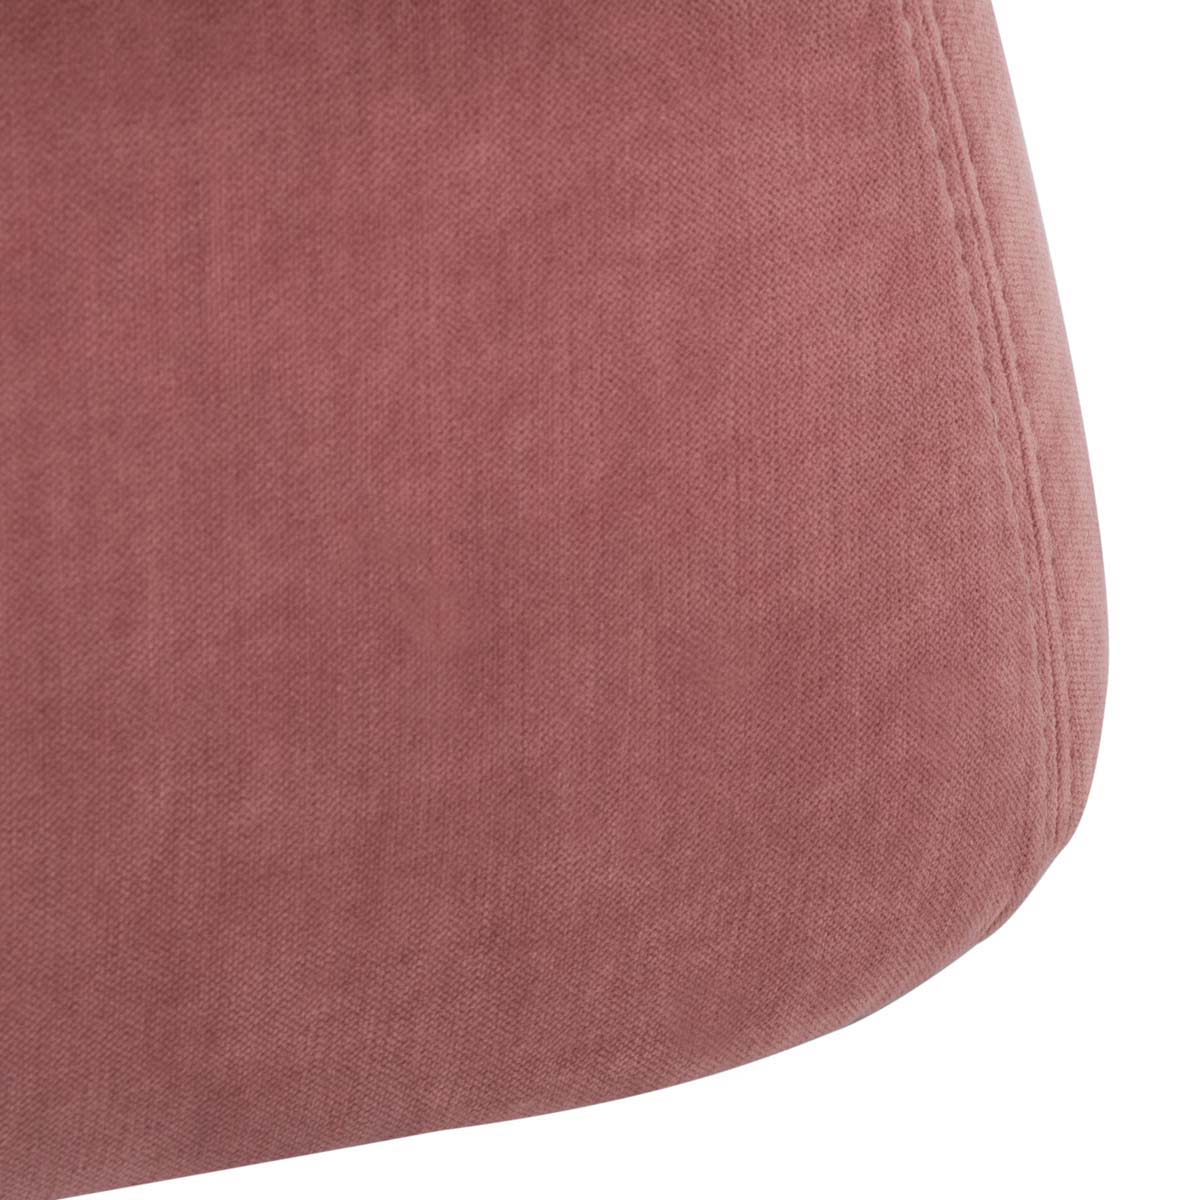 Safavieh Couture Kiana Modern Accent Chair - Dusty Rose